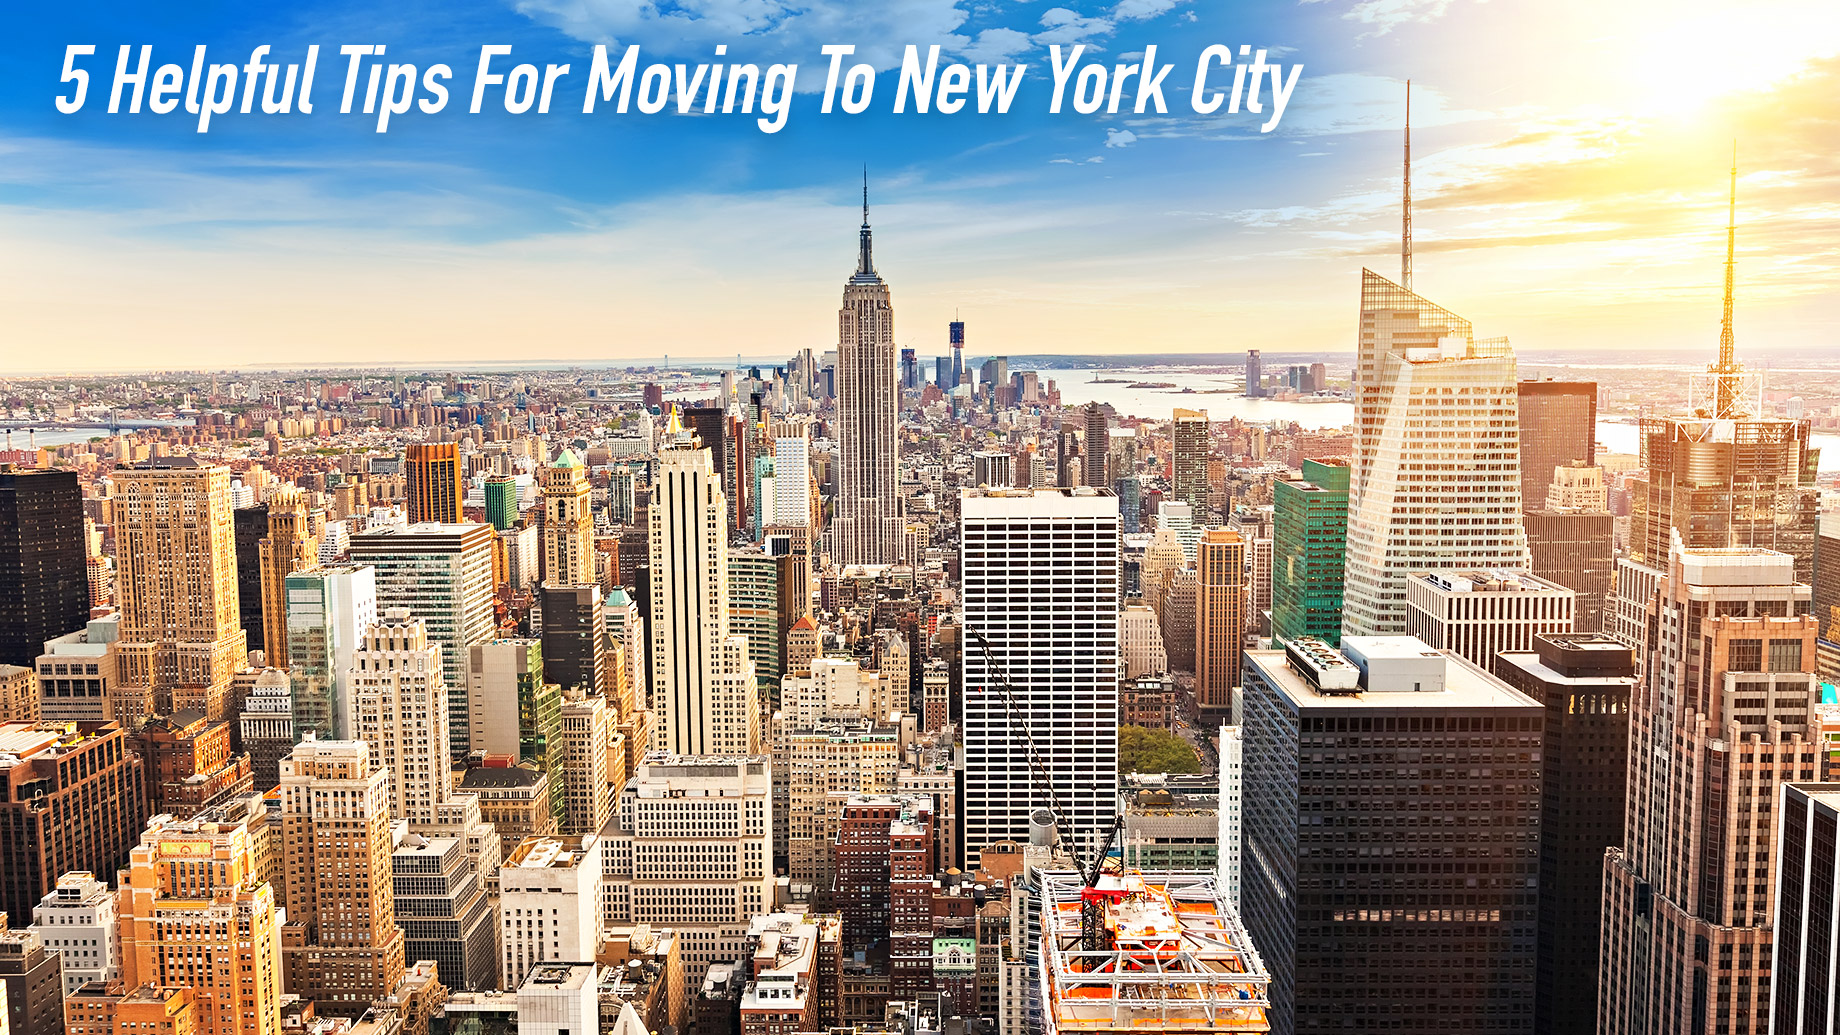 5 Helpful Tips For Moving To New York City